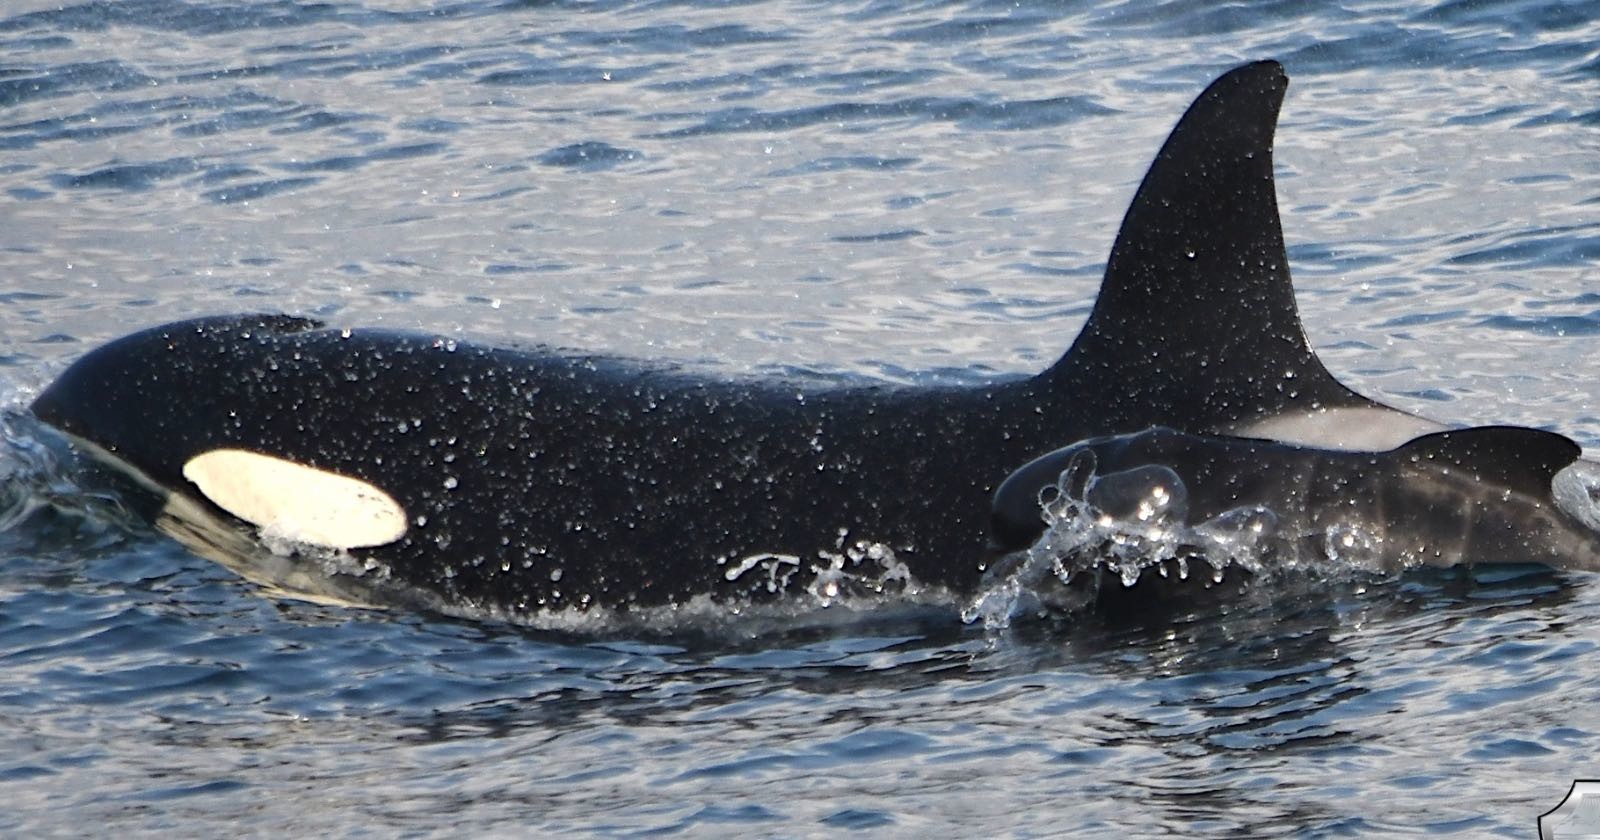 Photos Show Orca Caring for Baby Pilot Whale in First Known Case